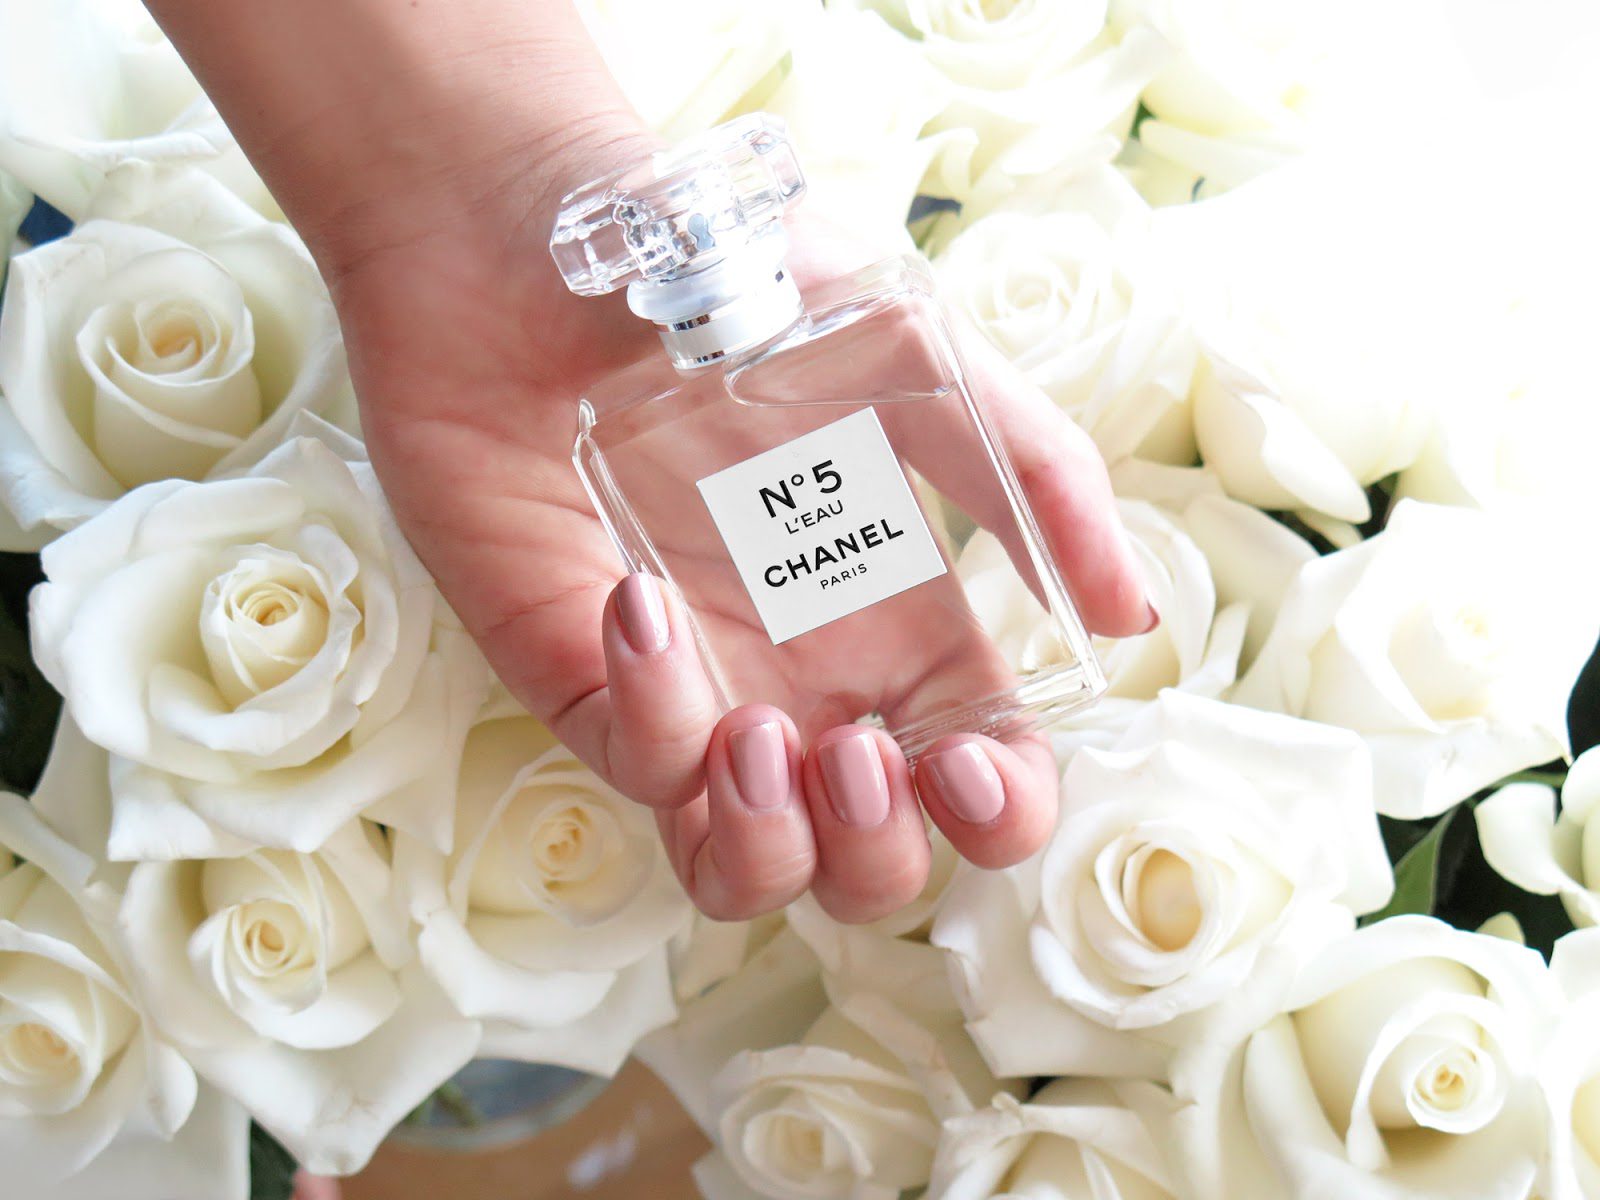 Chanel N°5 L'Eau Perfume with Roses